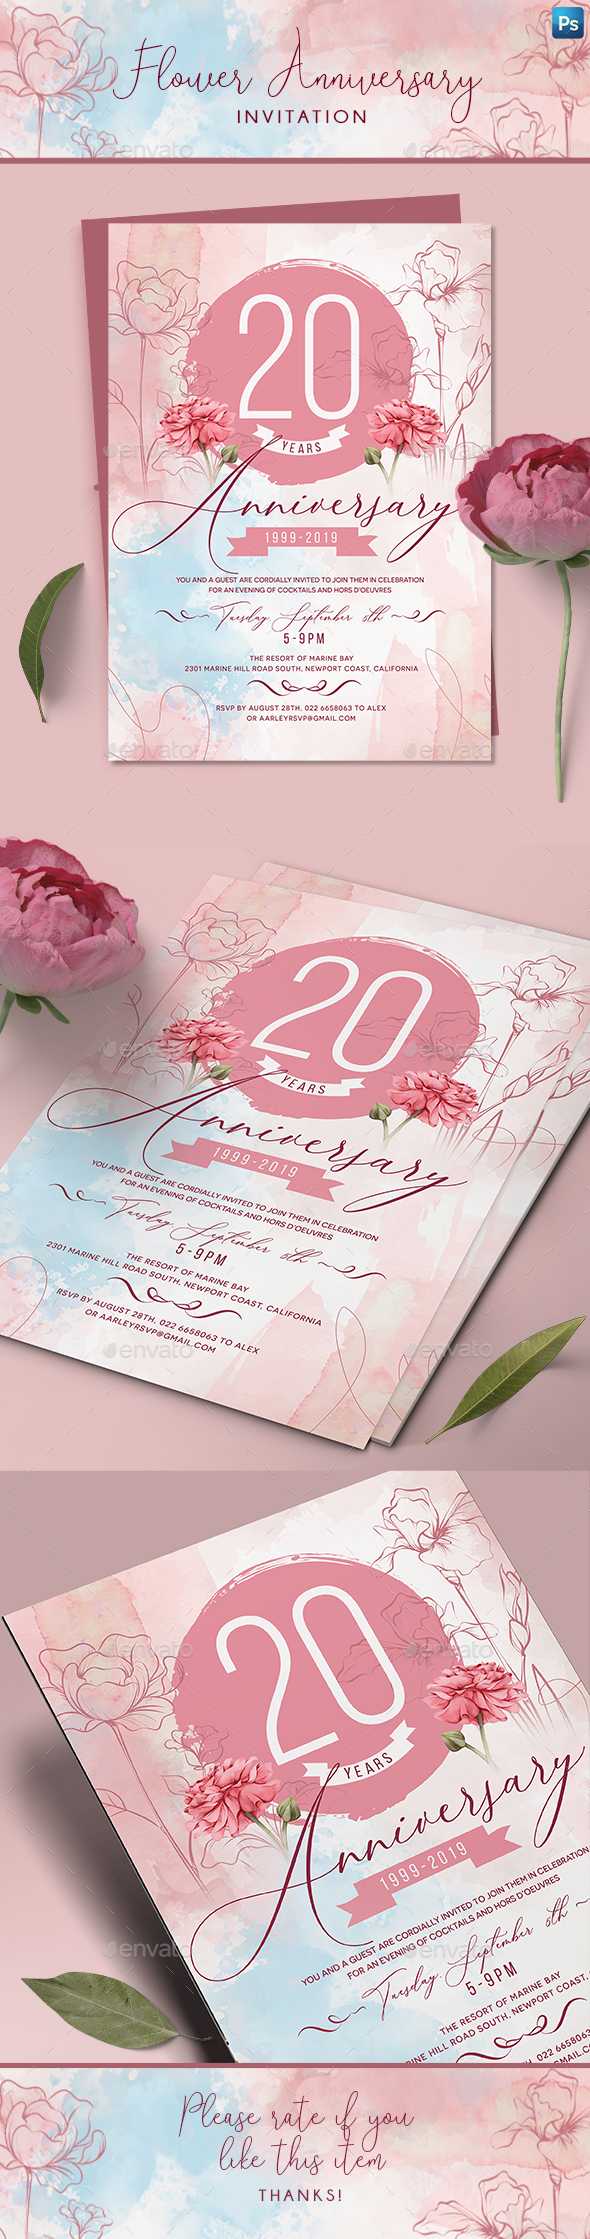 Greeting Card Designs & Templates From Graphicriver Throughout Death Anniversary Cards Templates